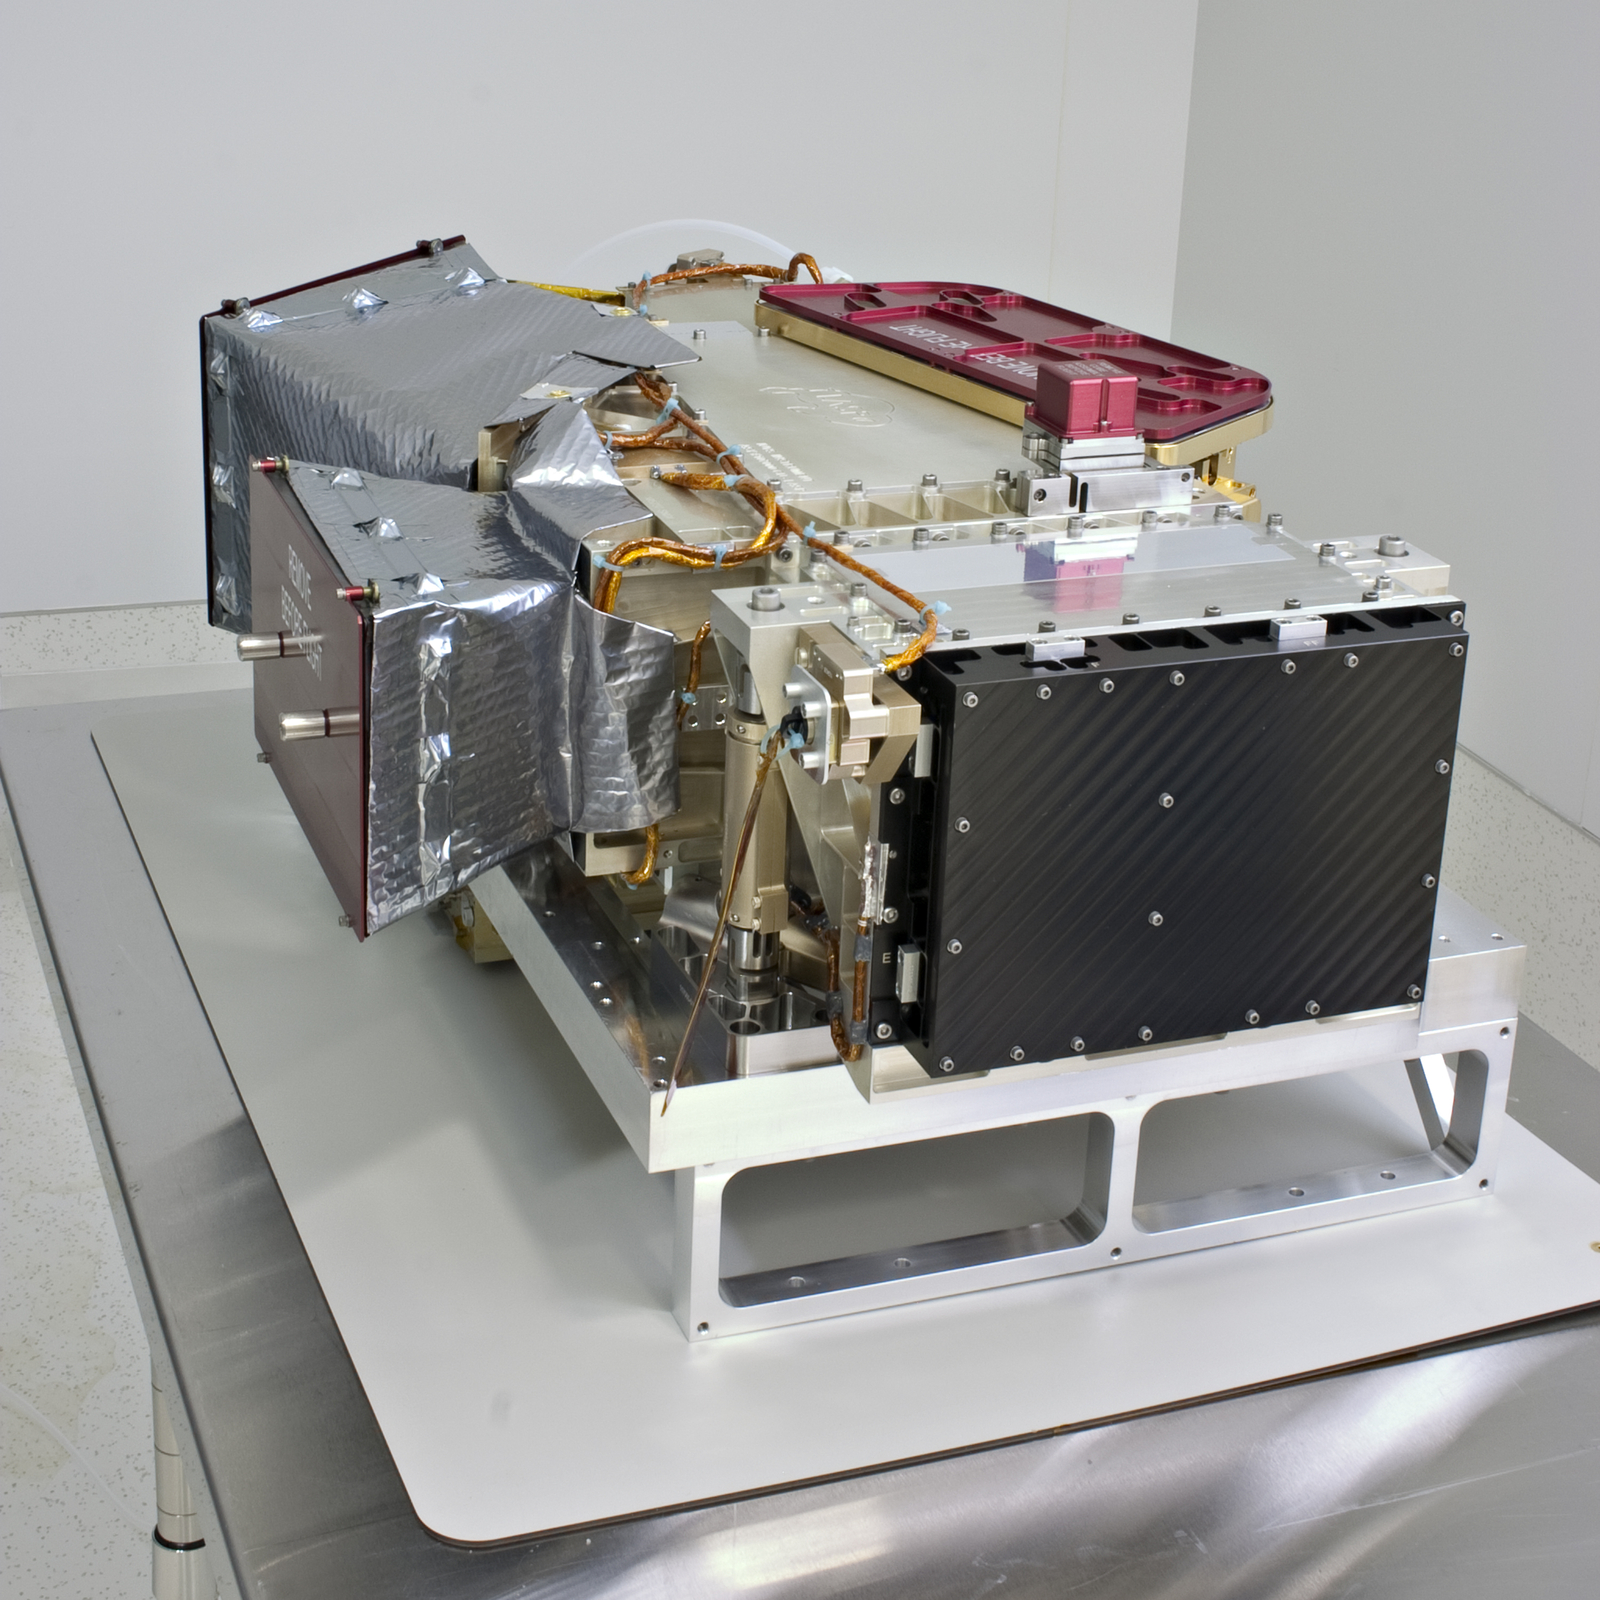 The Imaging Ultraviolet Spectrograph (IUVS) is a part of the Remote Sensing (RS) Package and measures global characteristics of the upper atmosphere and ionosphere via remote sensing.